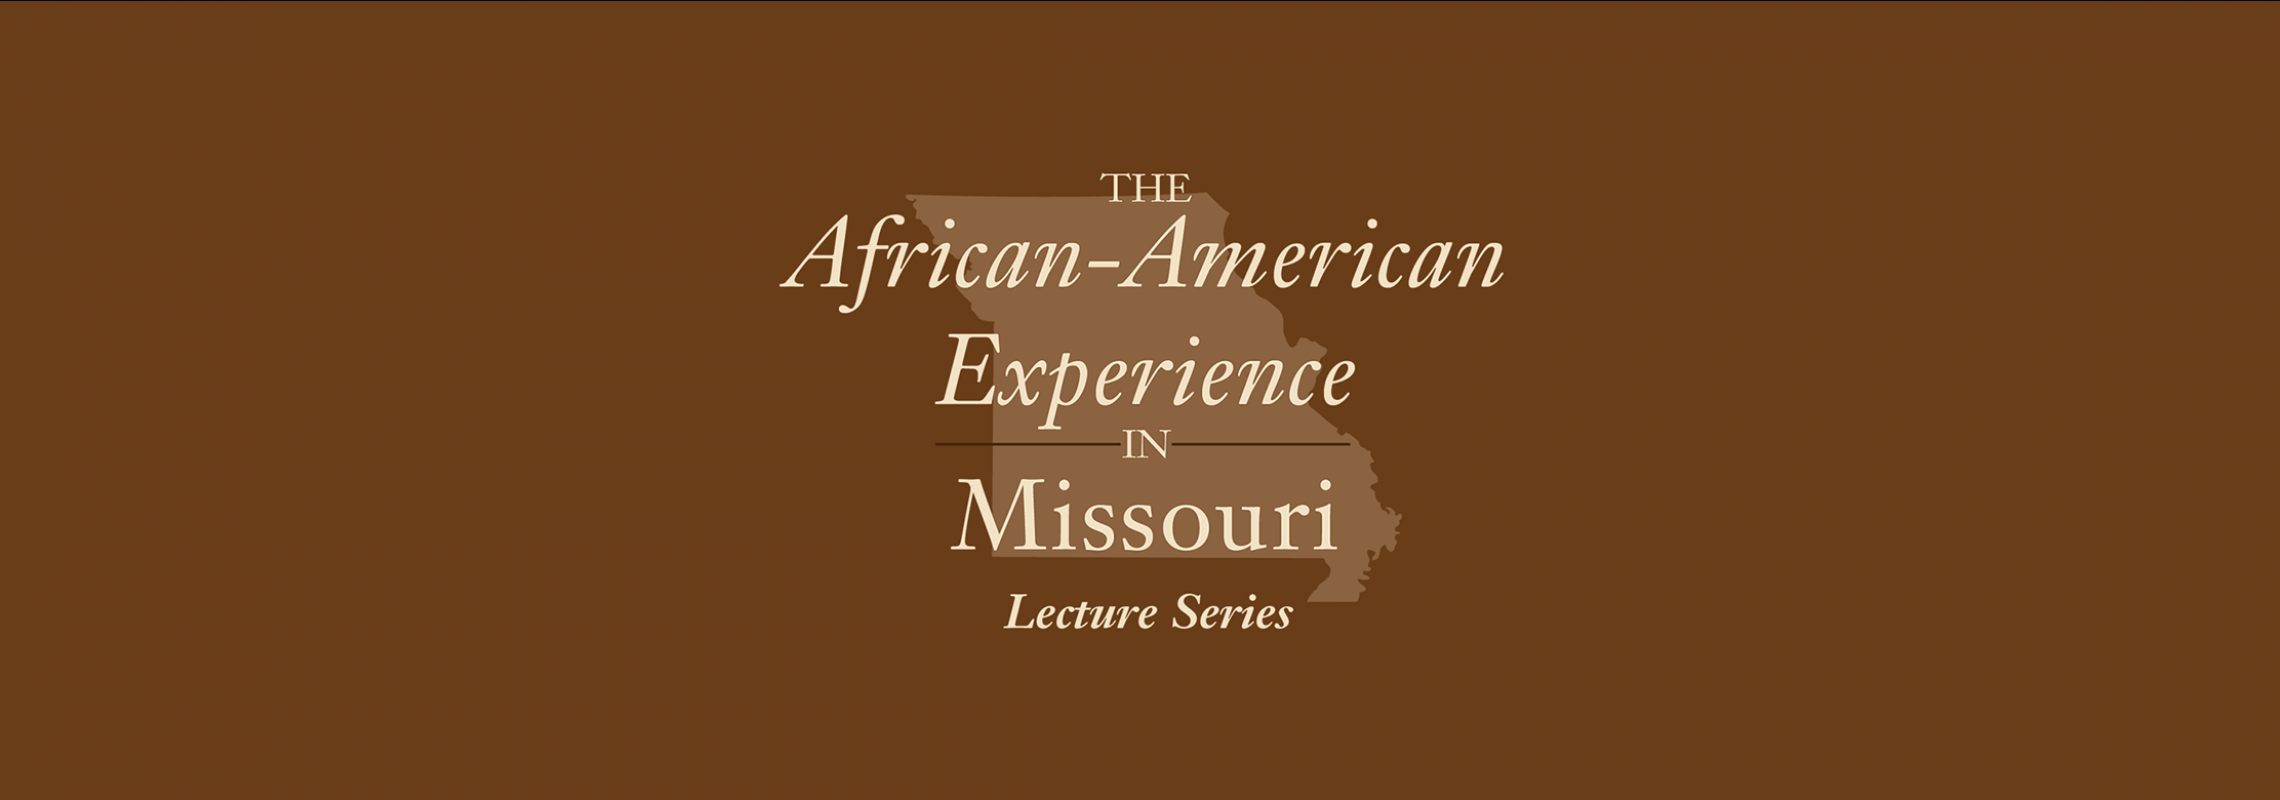 The African American Experience in Missouri Lecture Series